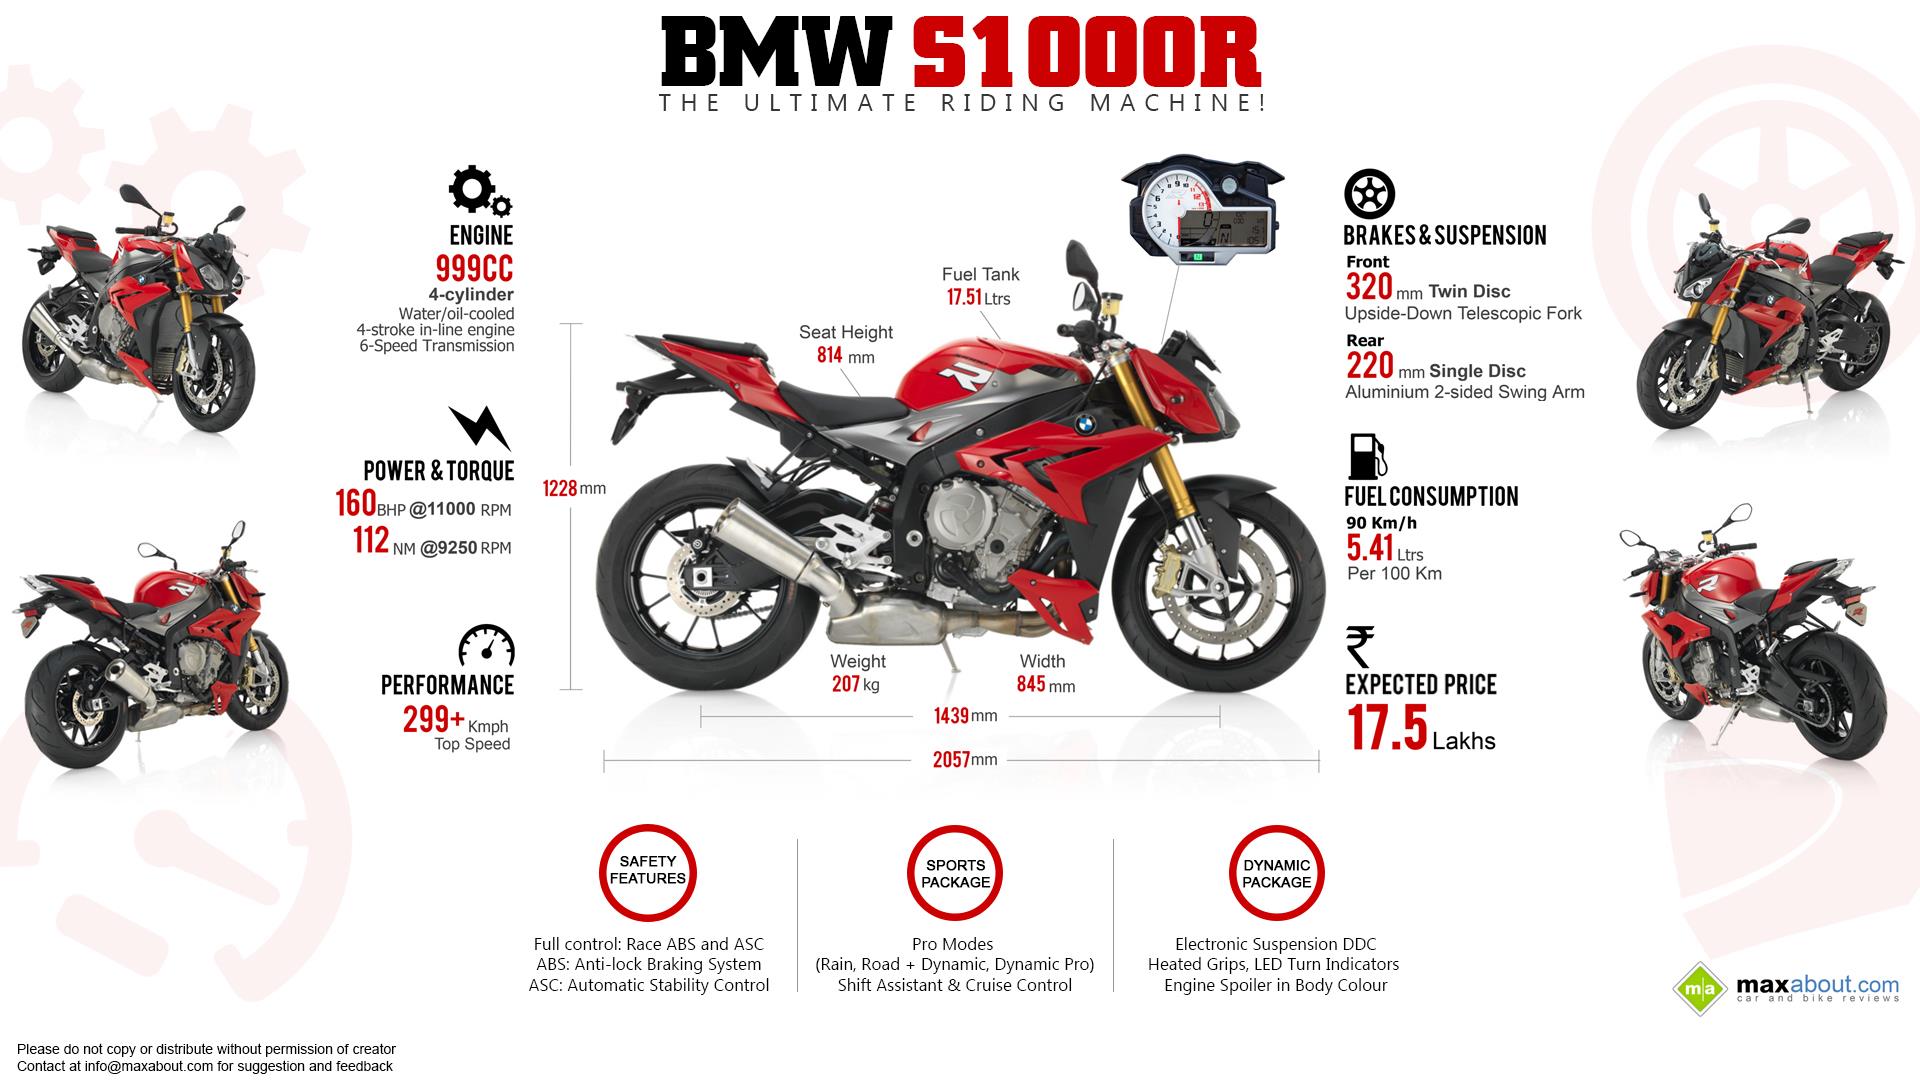 Bmw machine motorcycle riding ultimate